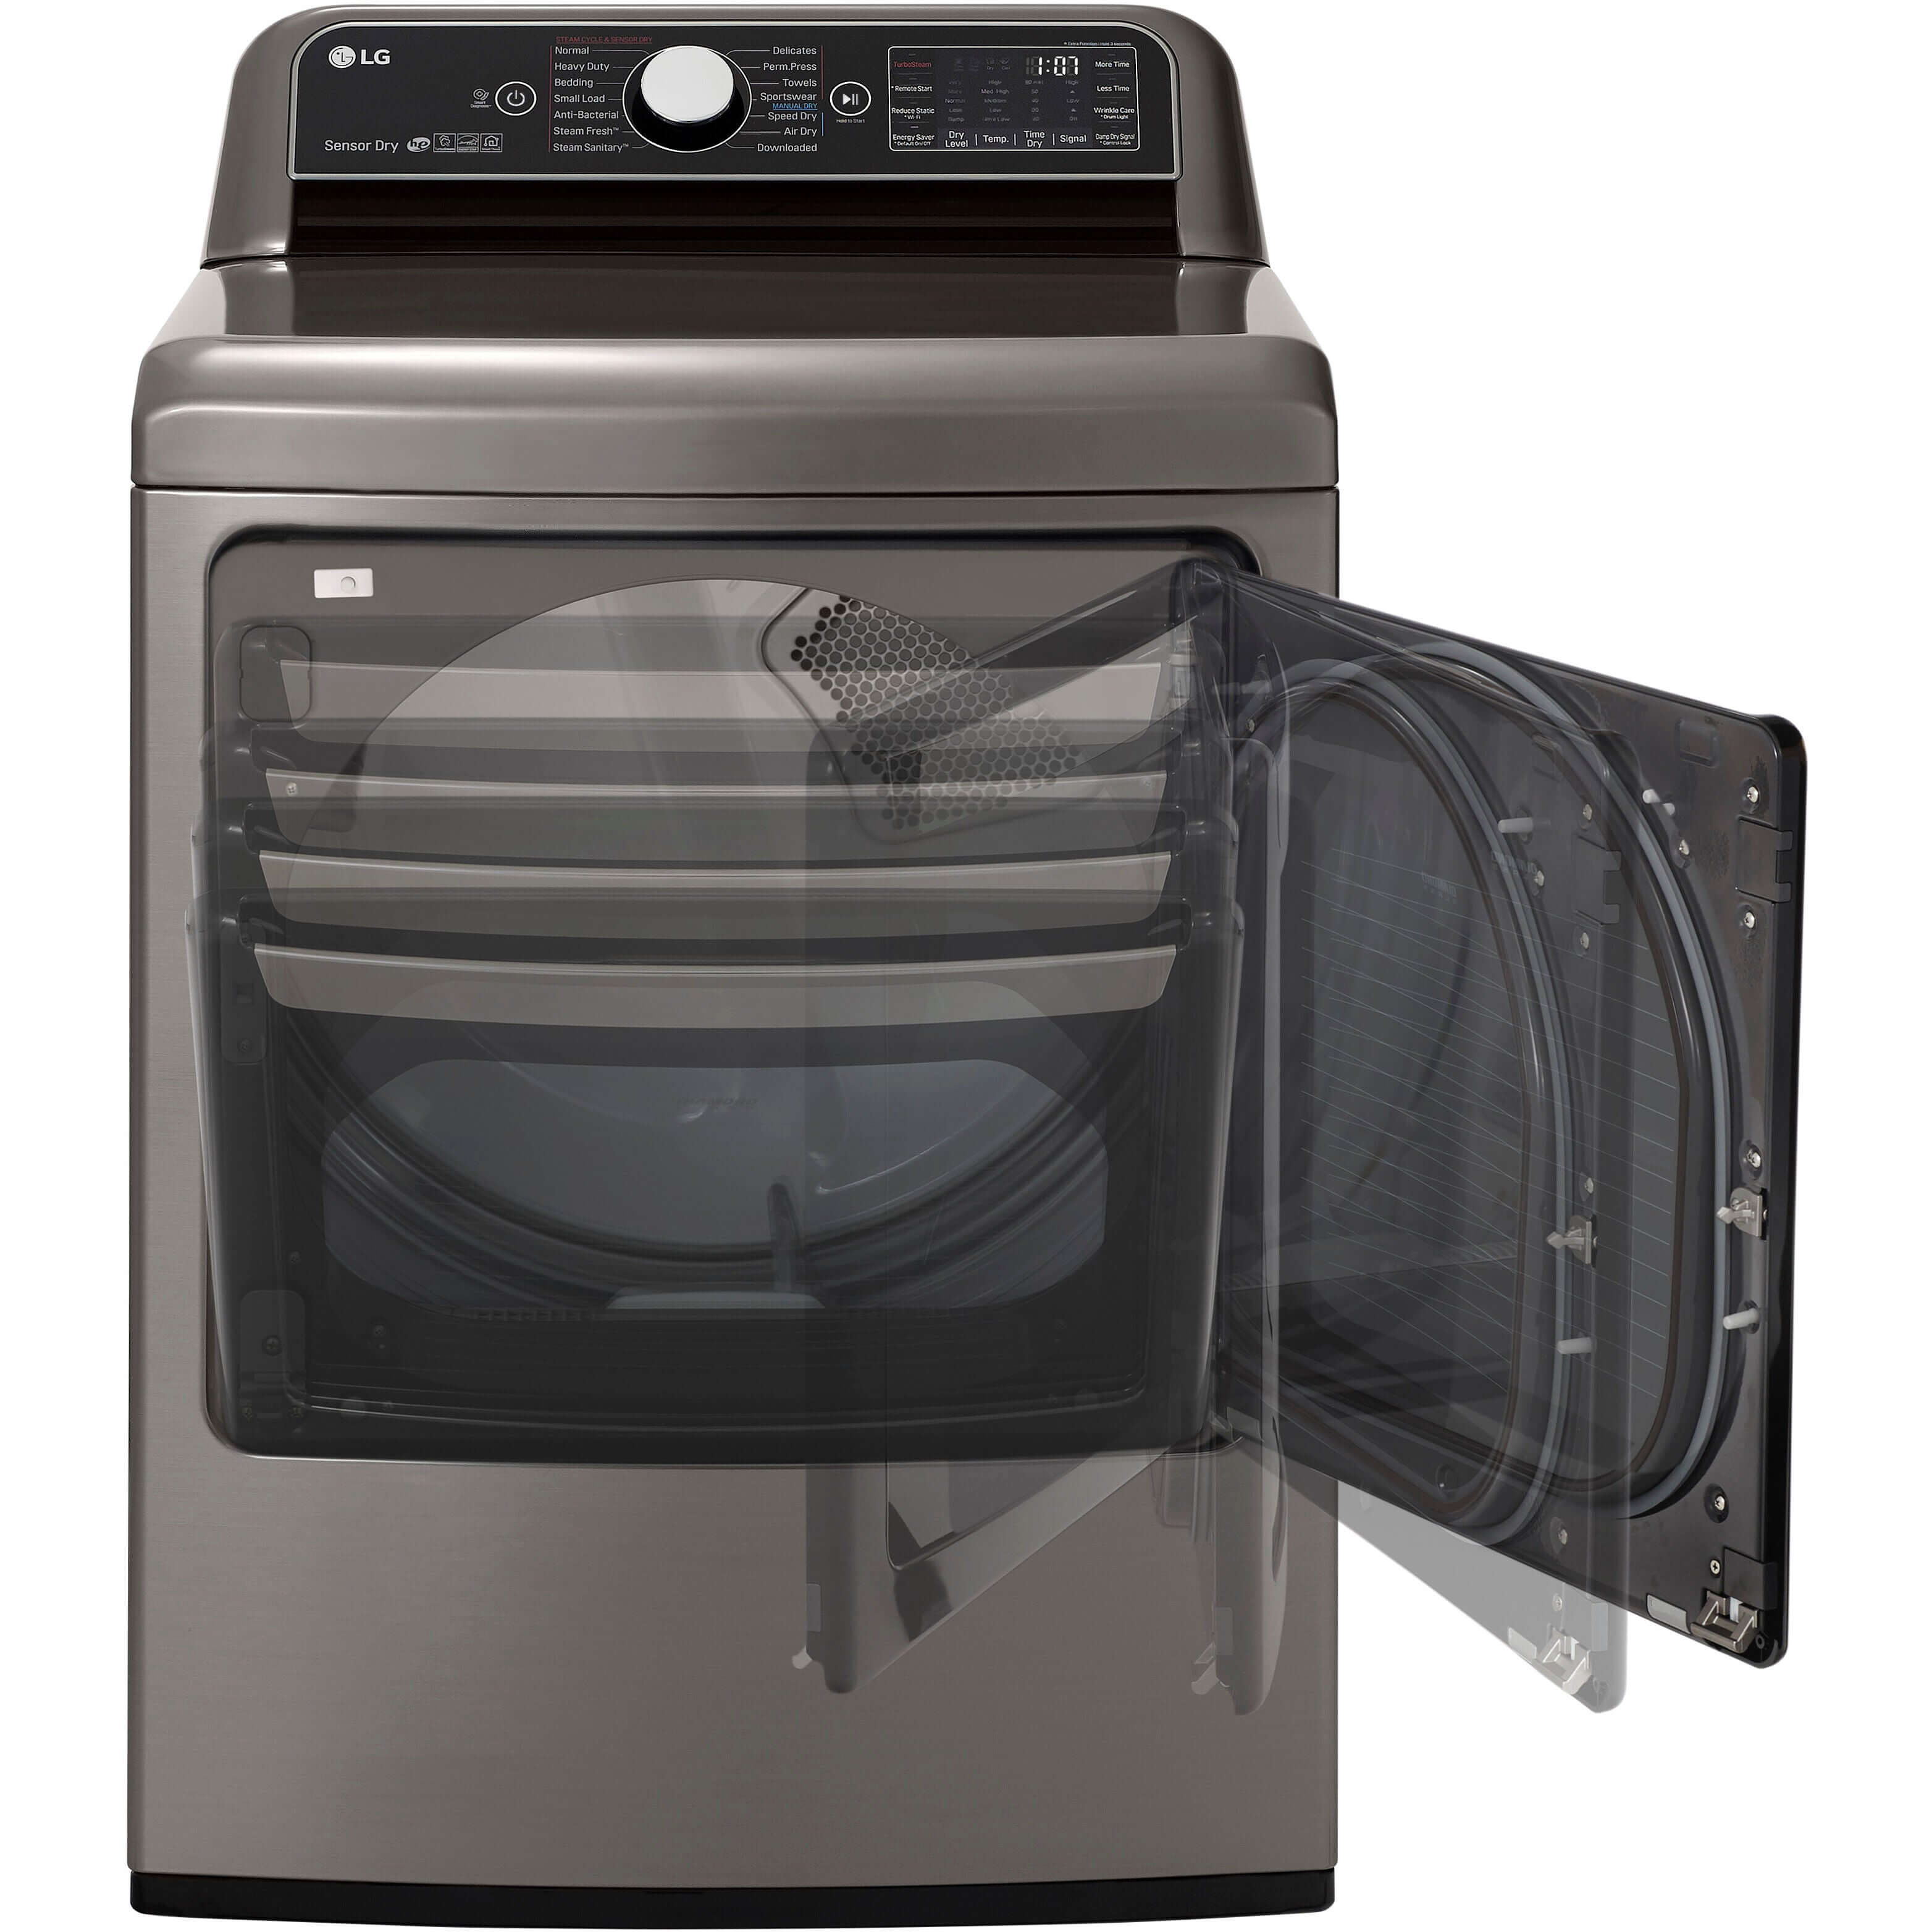 LG 27 Inch Smart wi-fi Enabled Electric Dryer with TurboSteam In Graphite Steel 7.3 cu. ft. (DLEX7800VE)